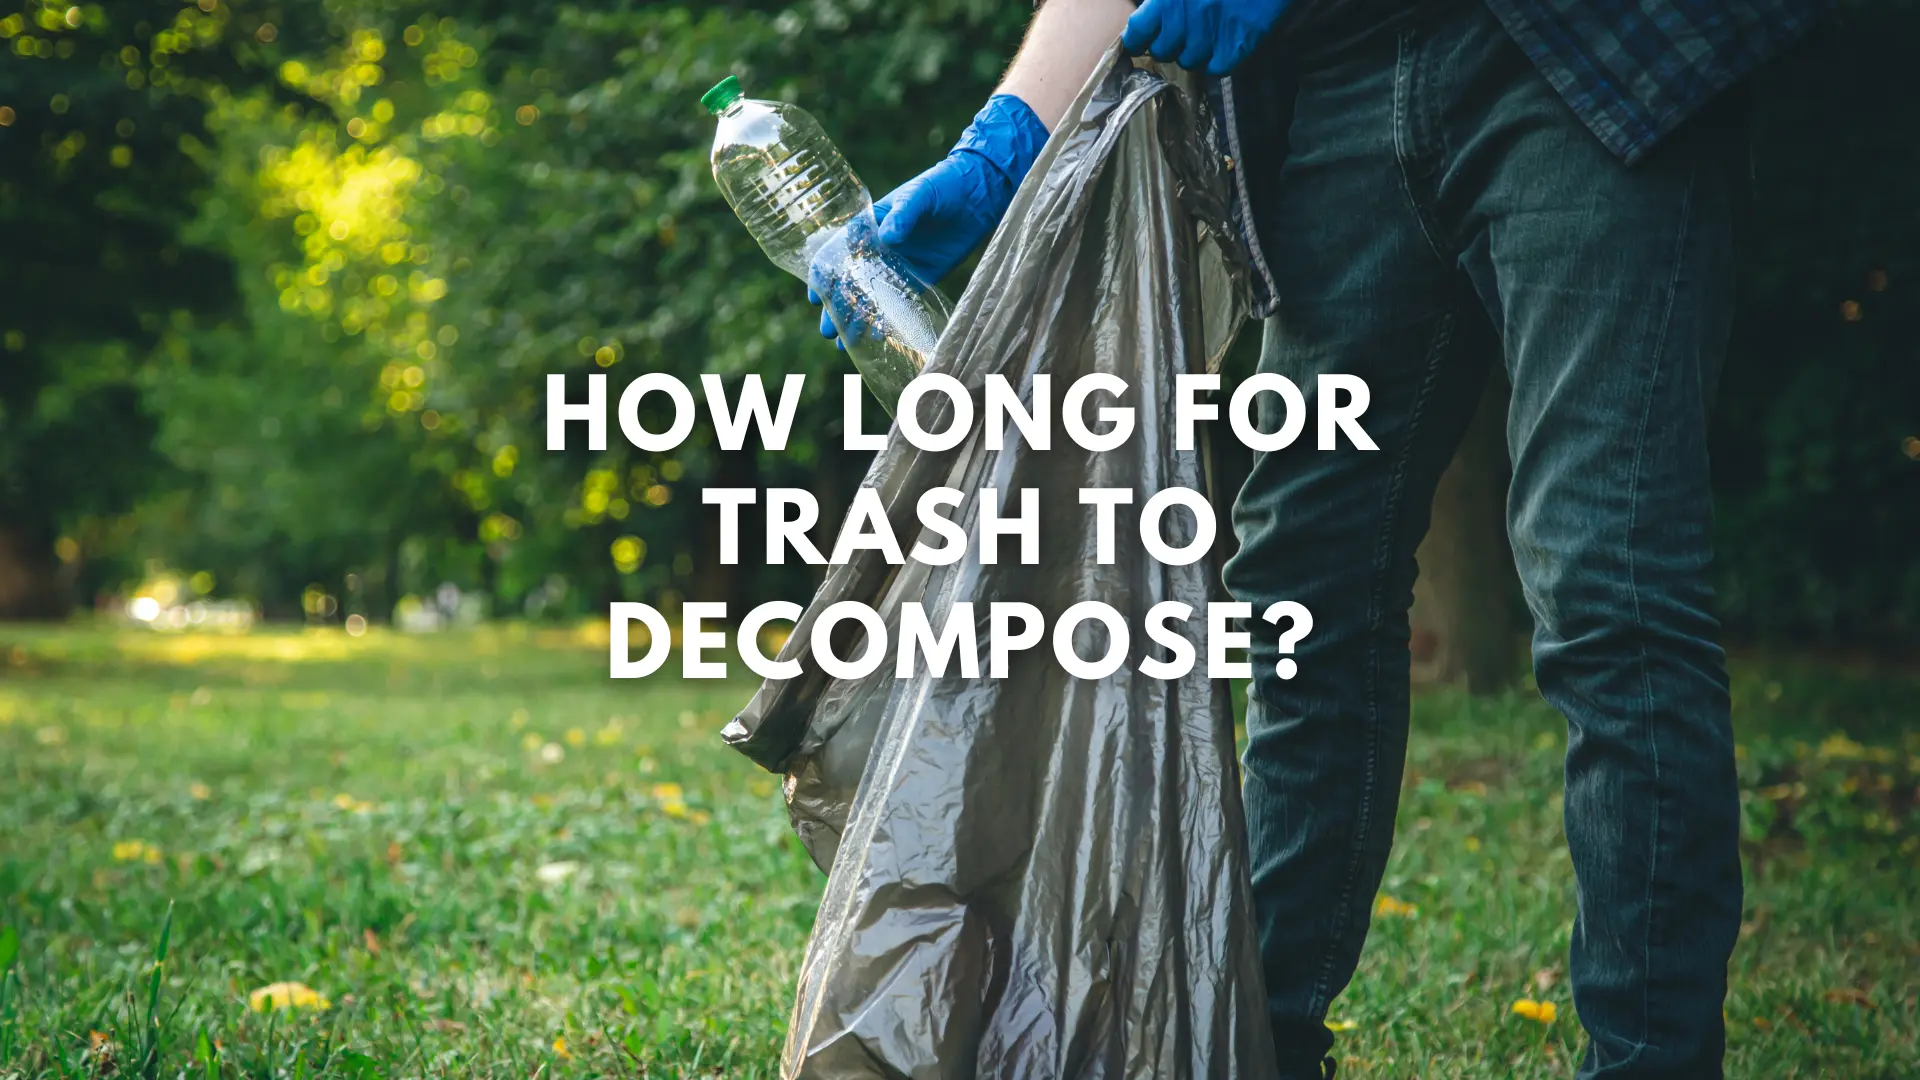 How Long For Trash To Decompose